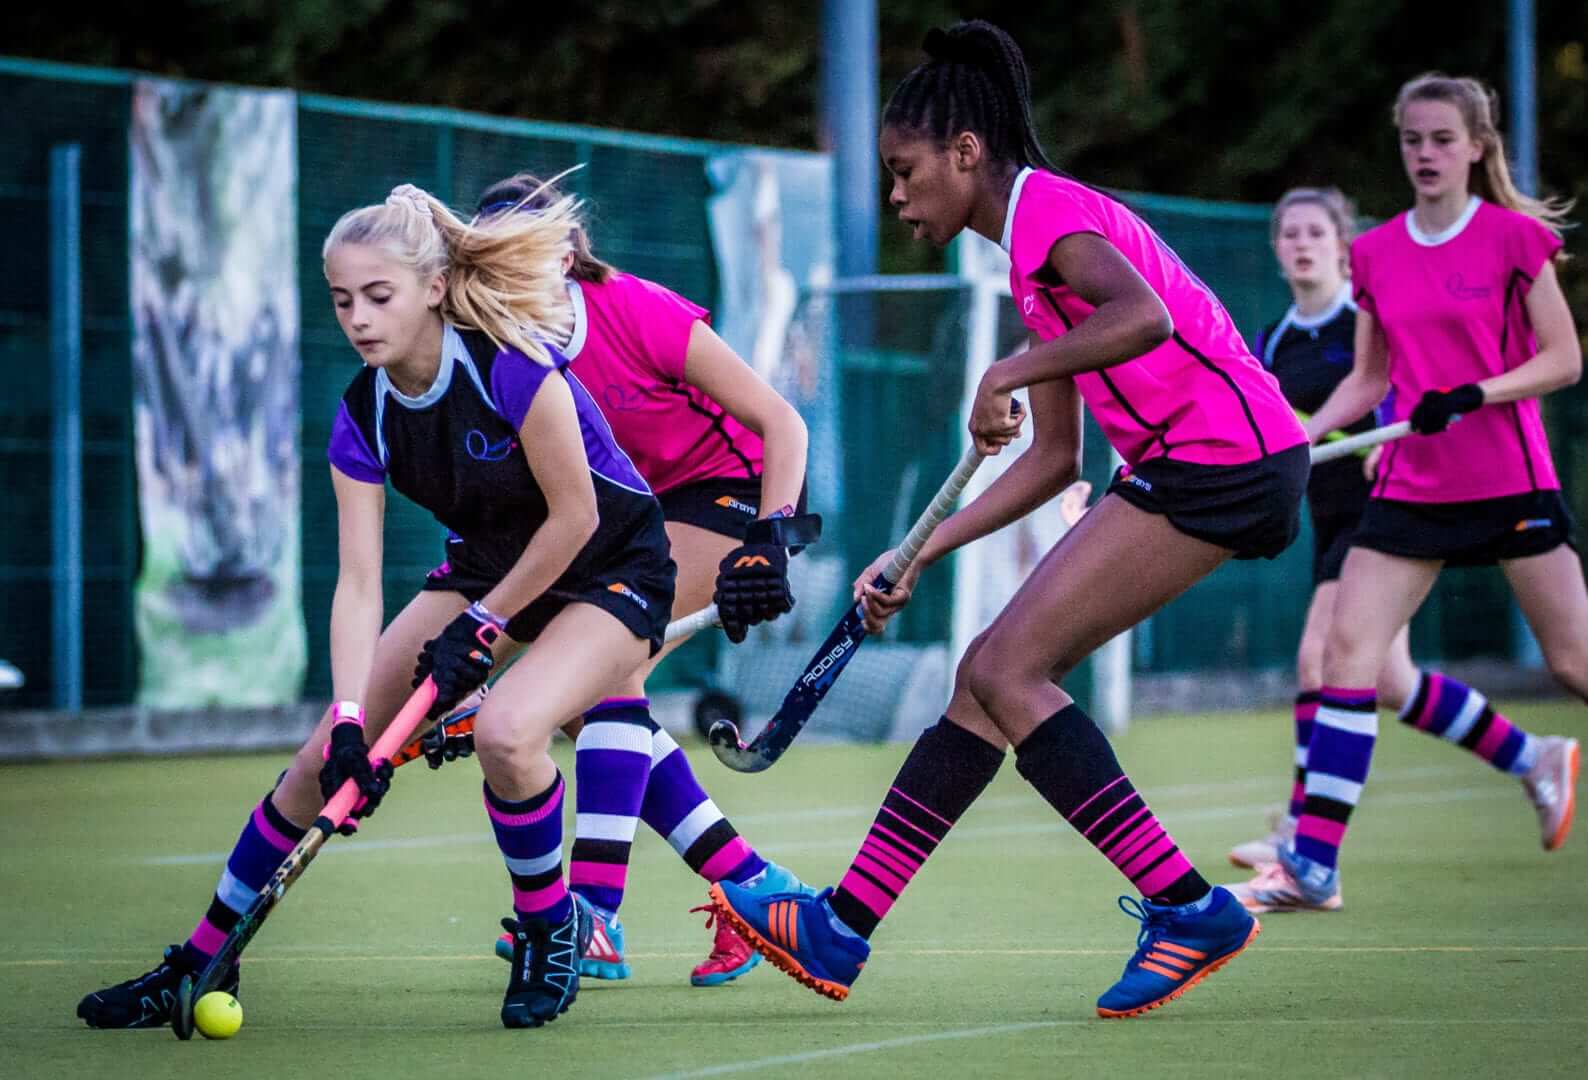 Hockey at Queenswood